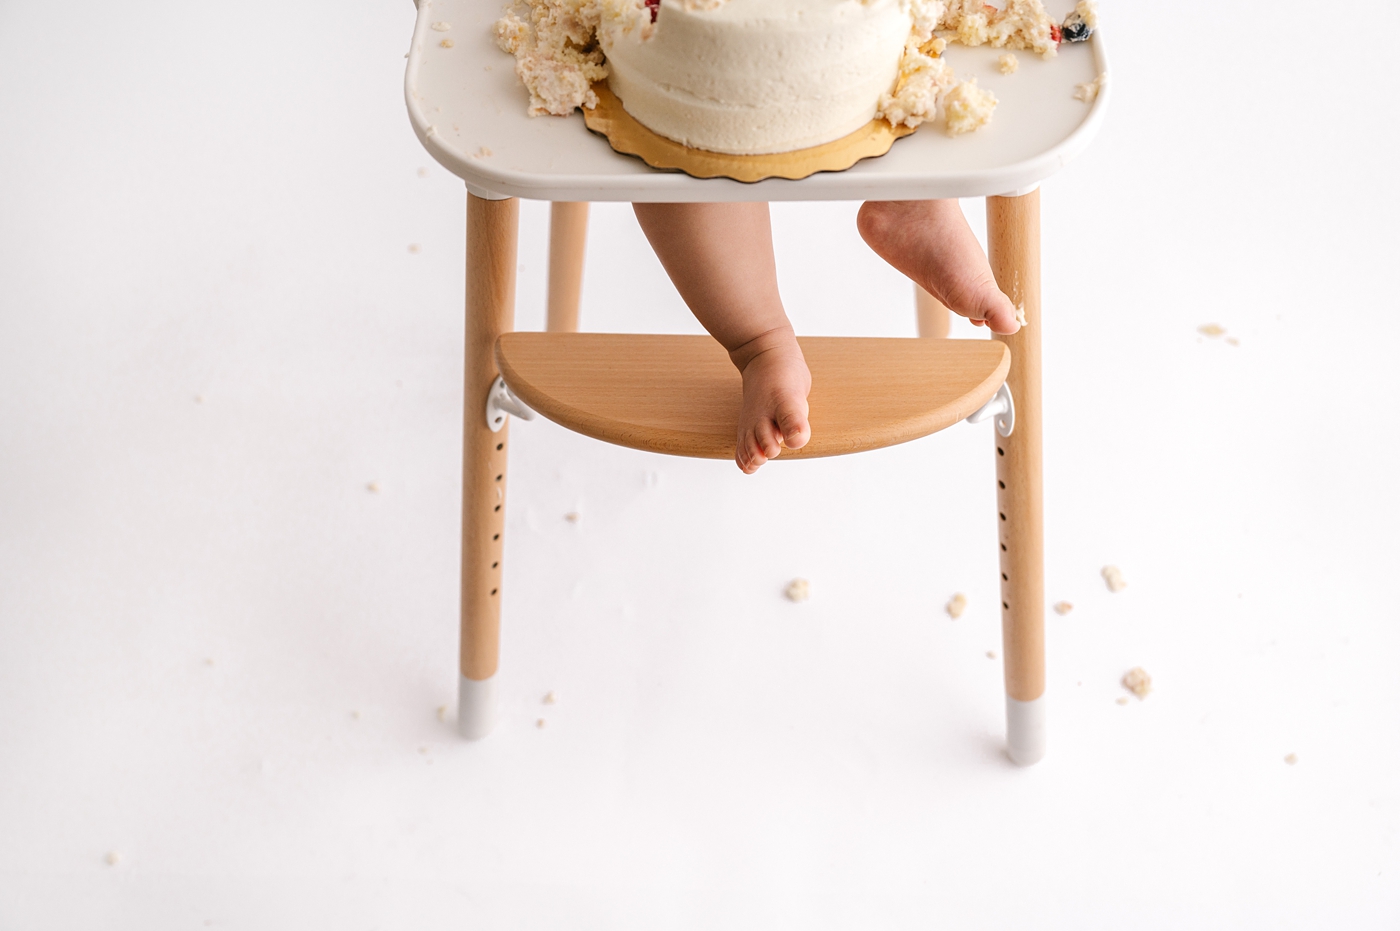 Little foot resting on highchair while crumbs are scattered on the floor. Photo by Meg Newton Photography.